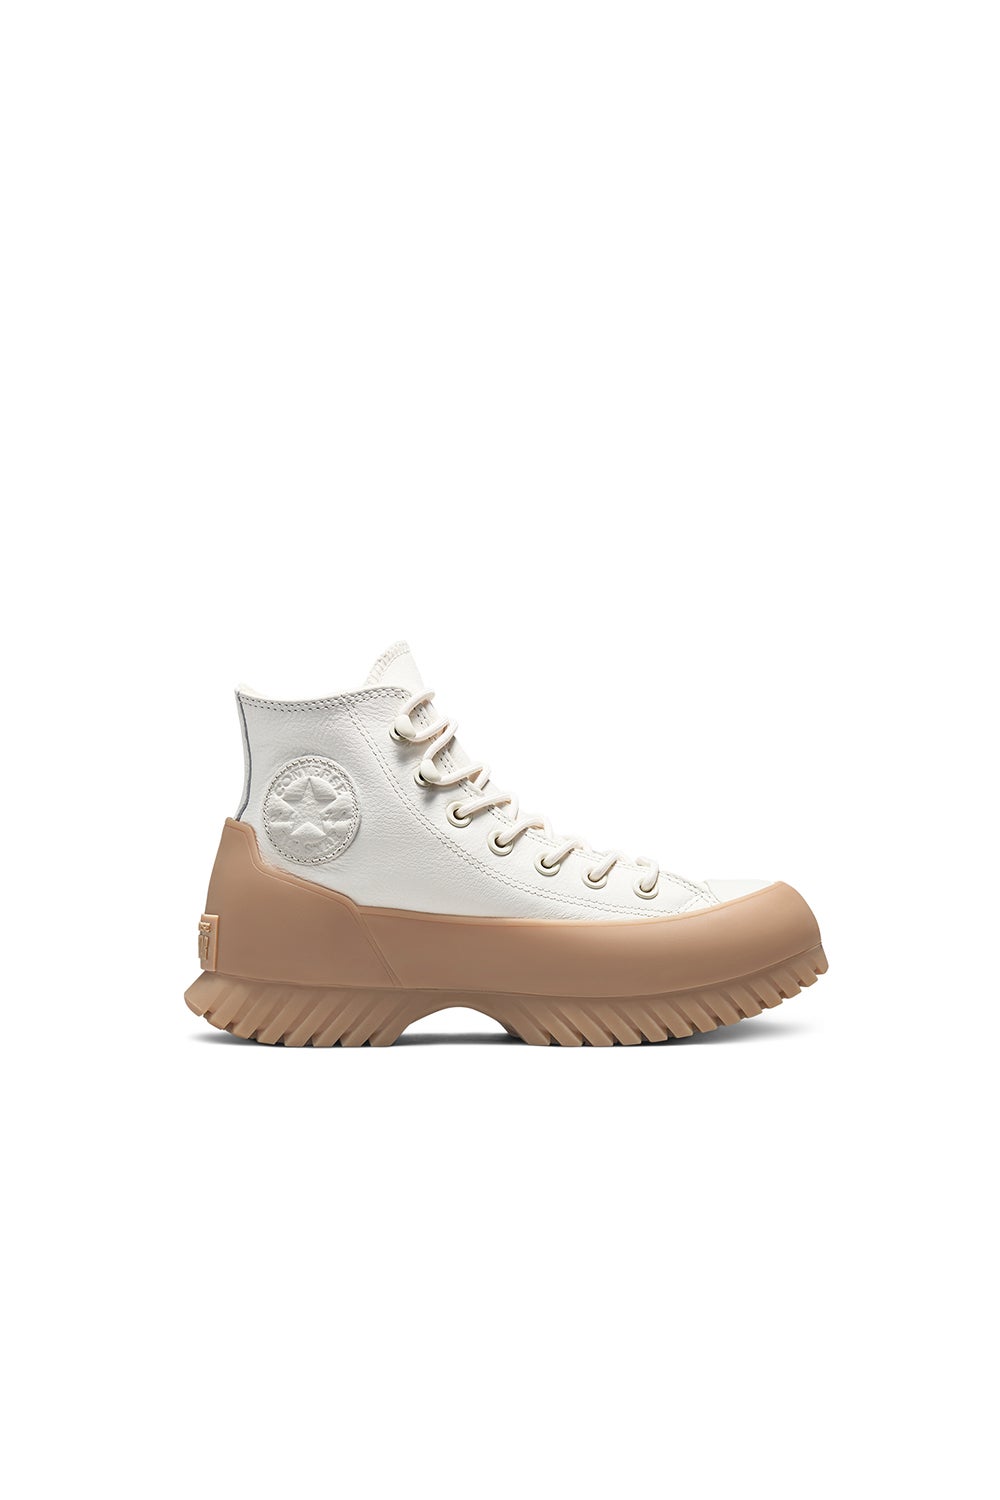 converse high top boots white